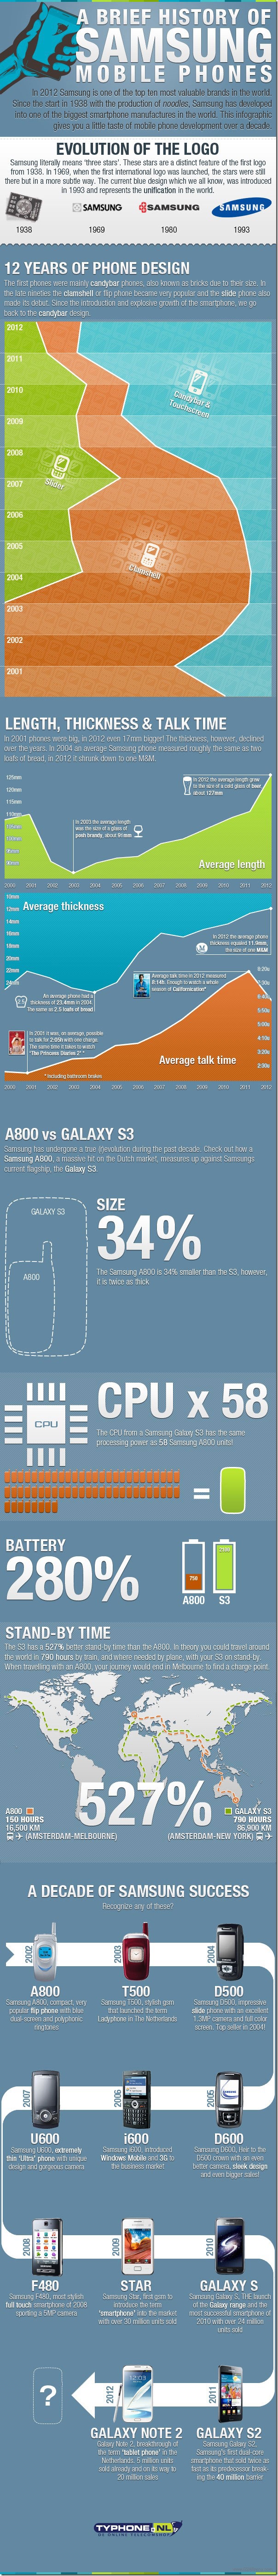 Samsung history Infographic Samsung’s Amazing History Shown in an Infographic